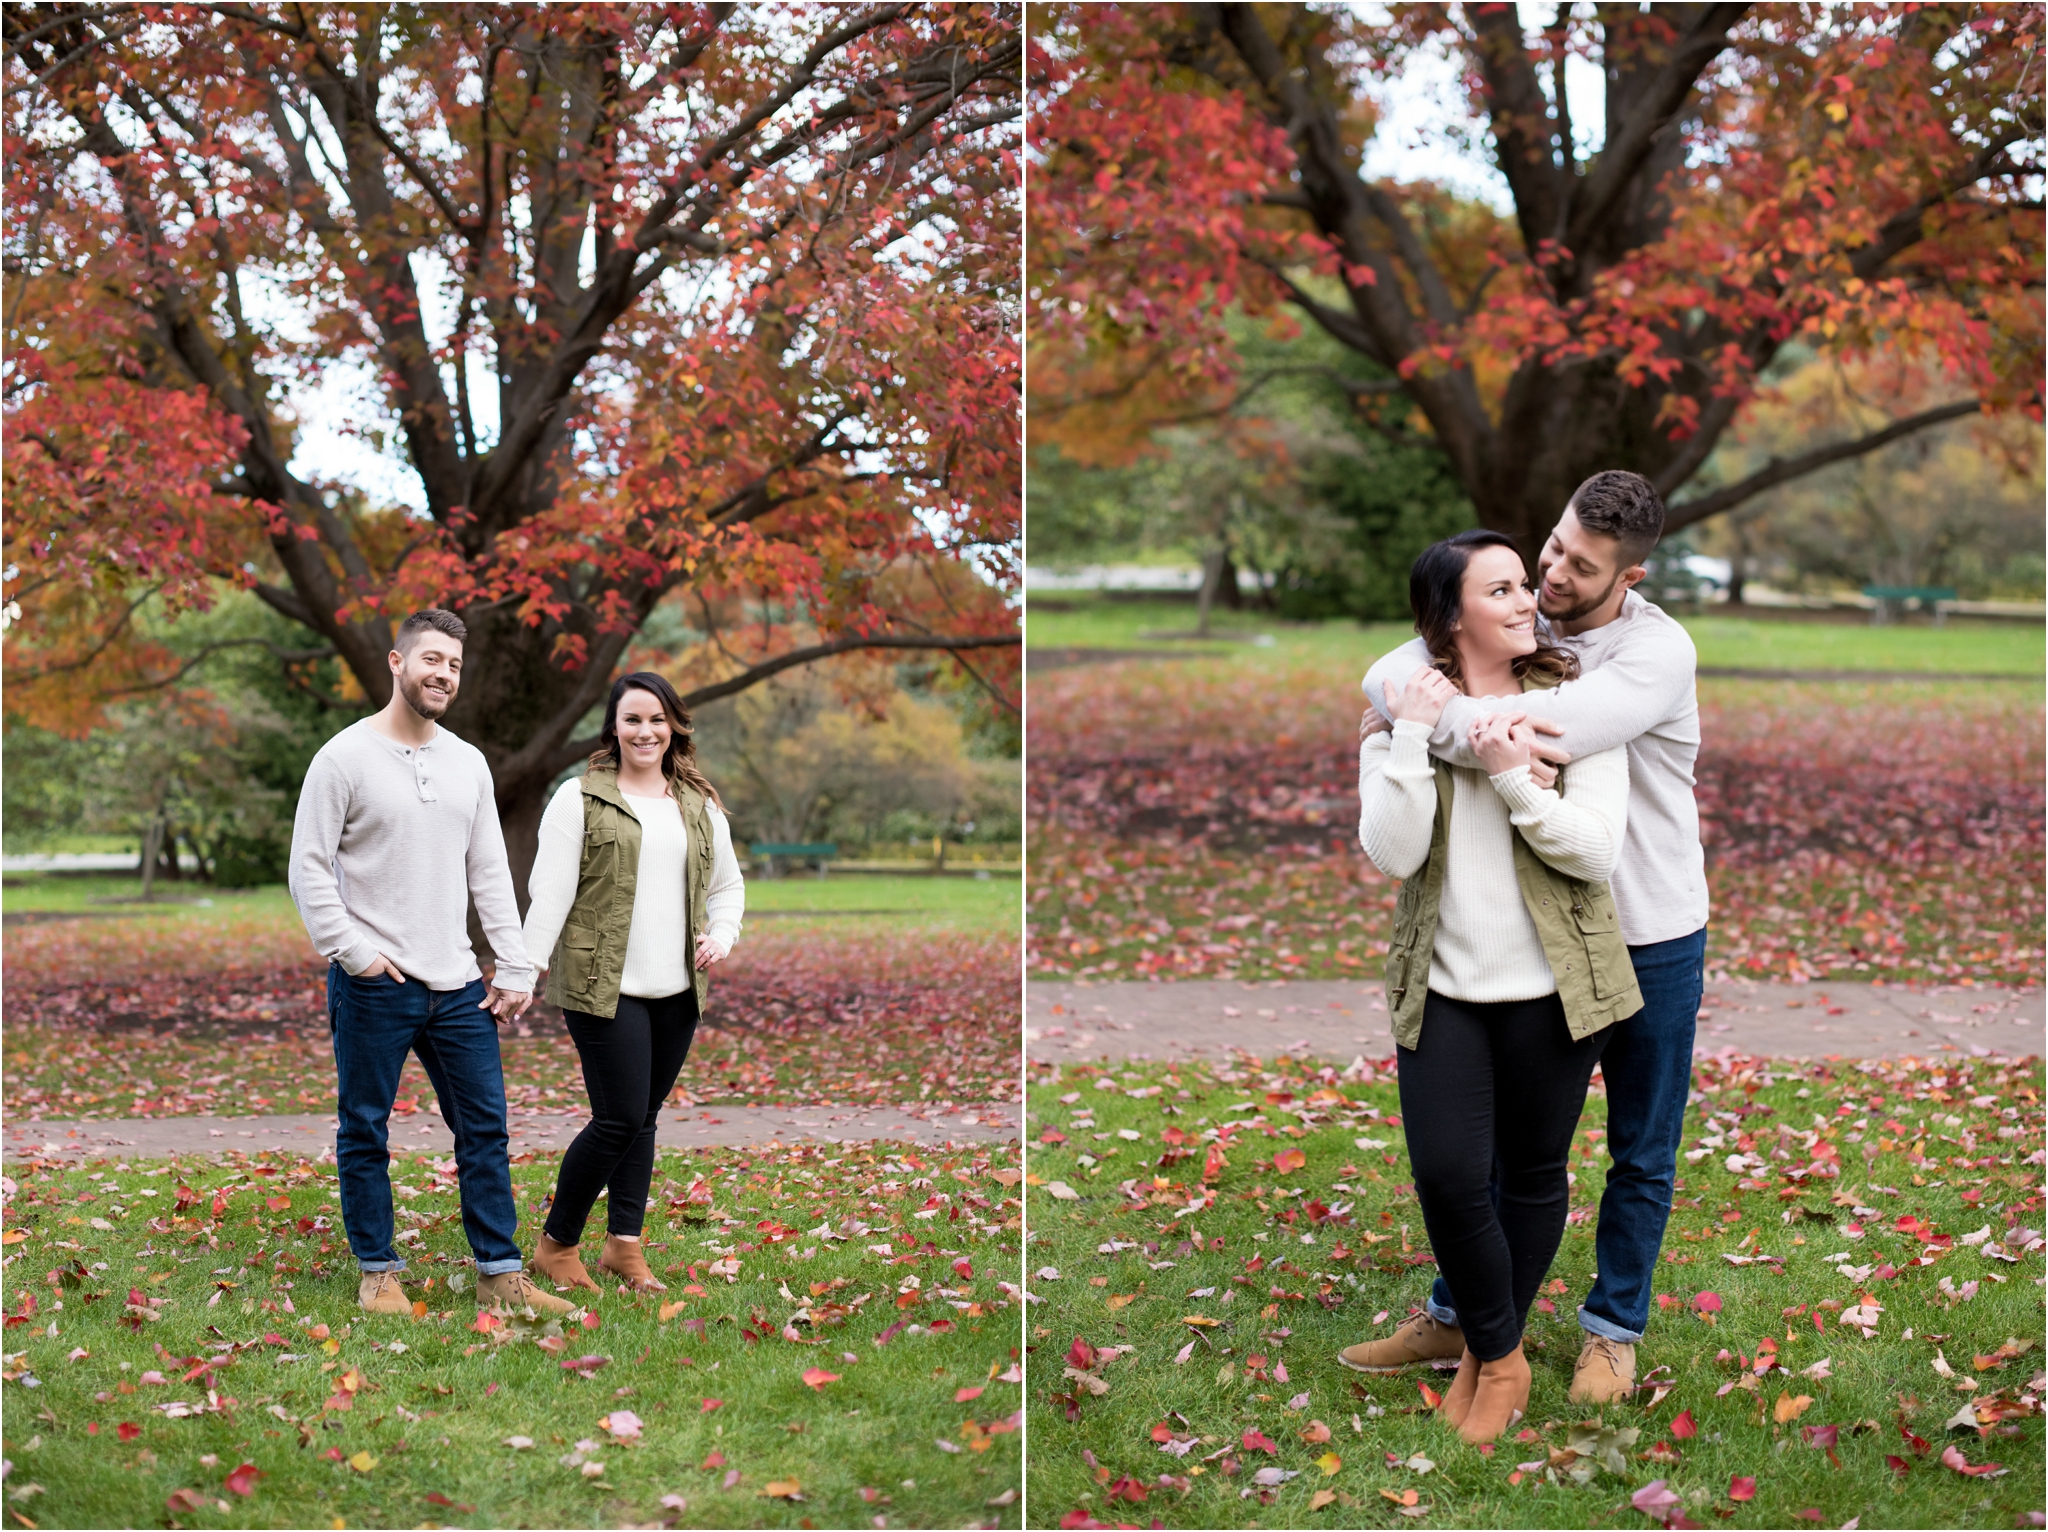 Fort Wayne IN Engagement Session | Sarah and Rachel Wedding Photographers | Foster Park | Beautiful Fall Foliage